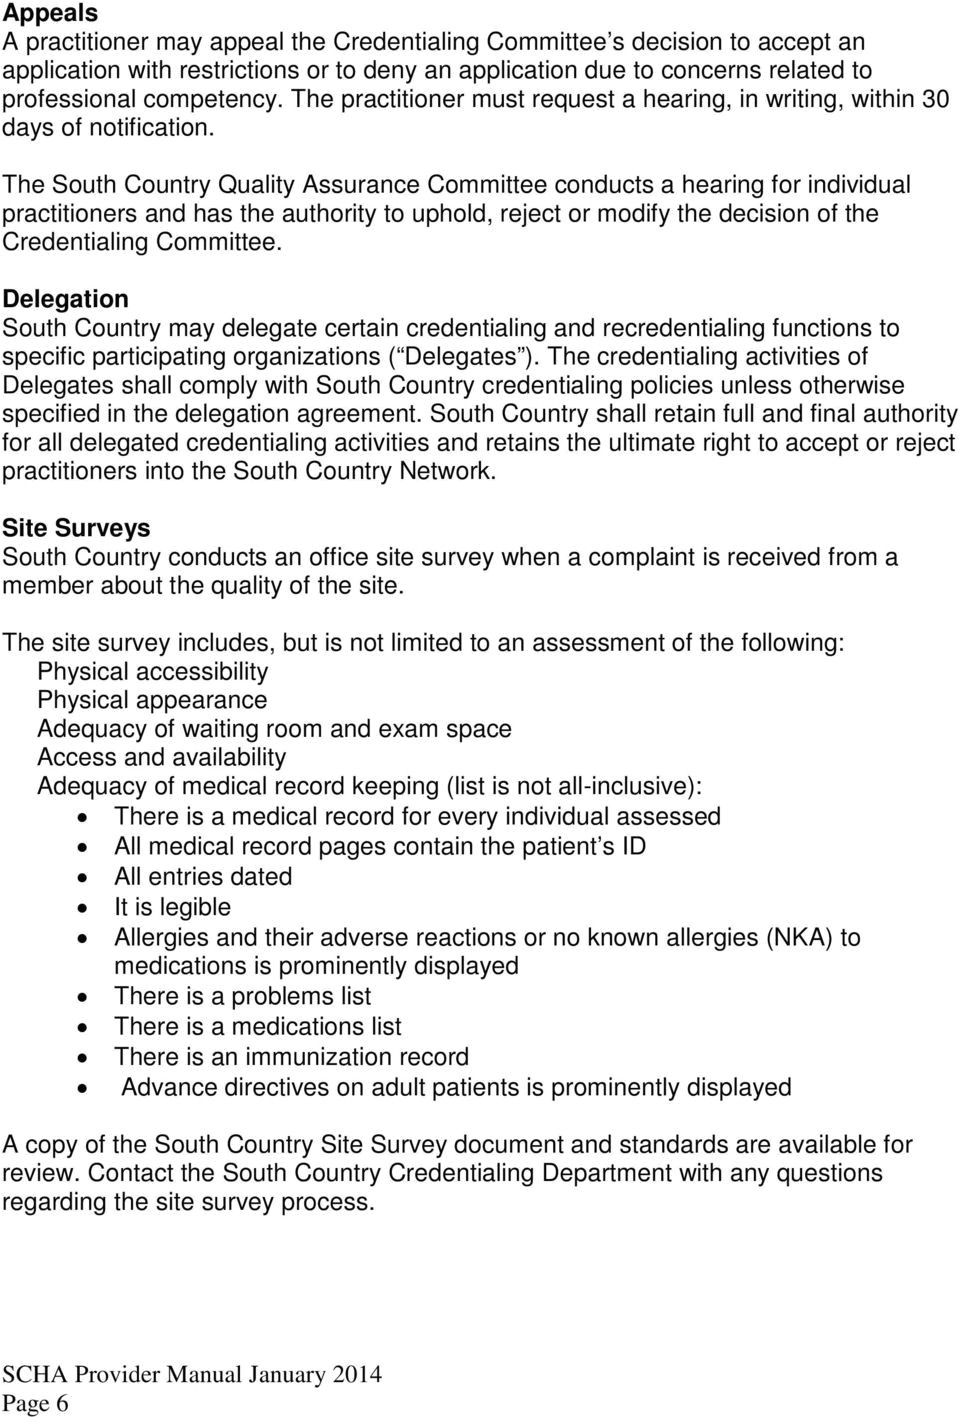 delegated credentialing agreement template